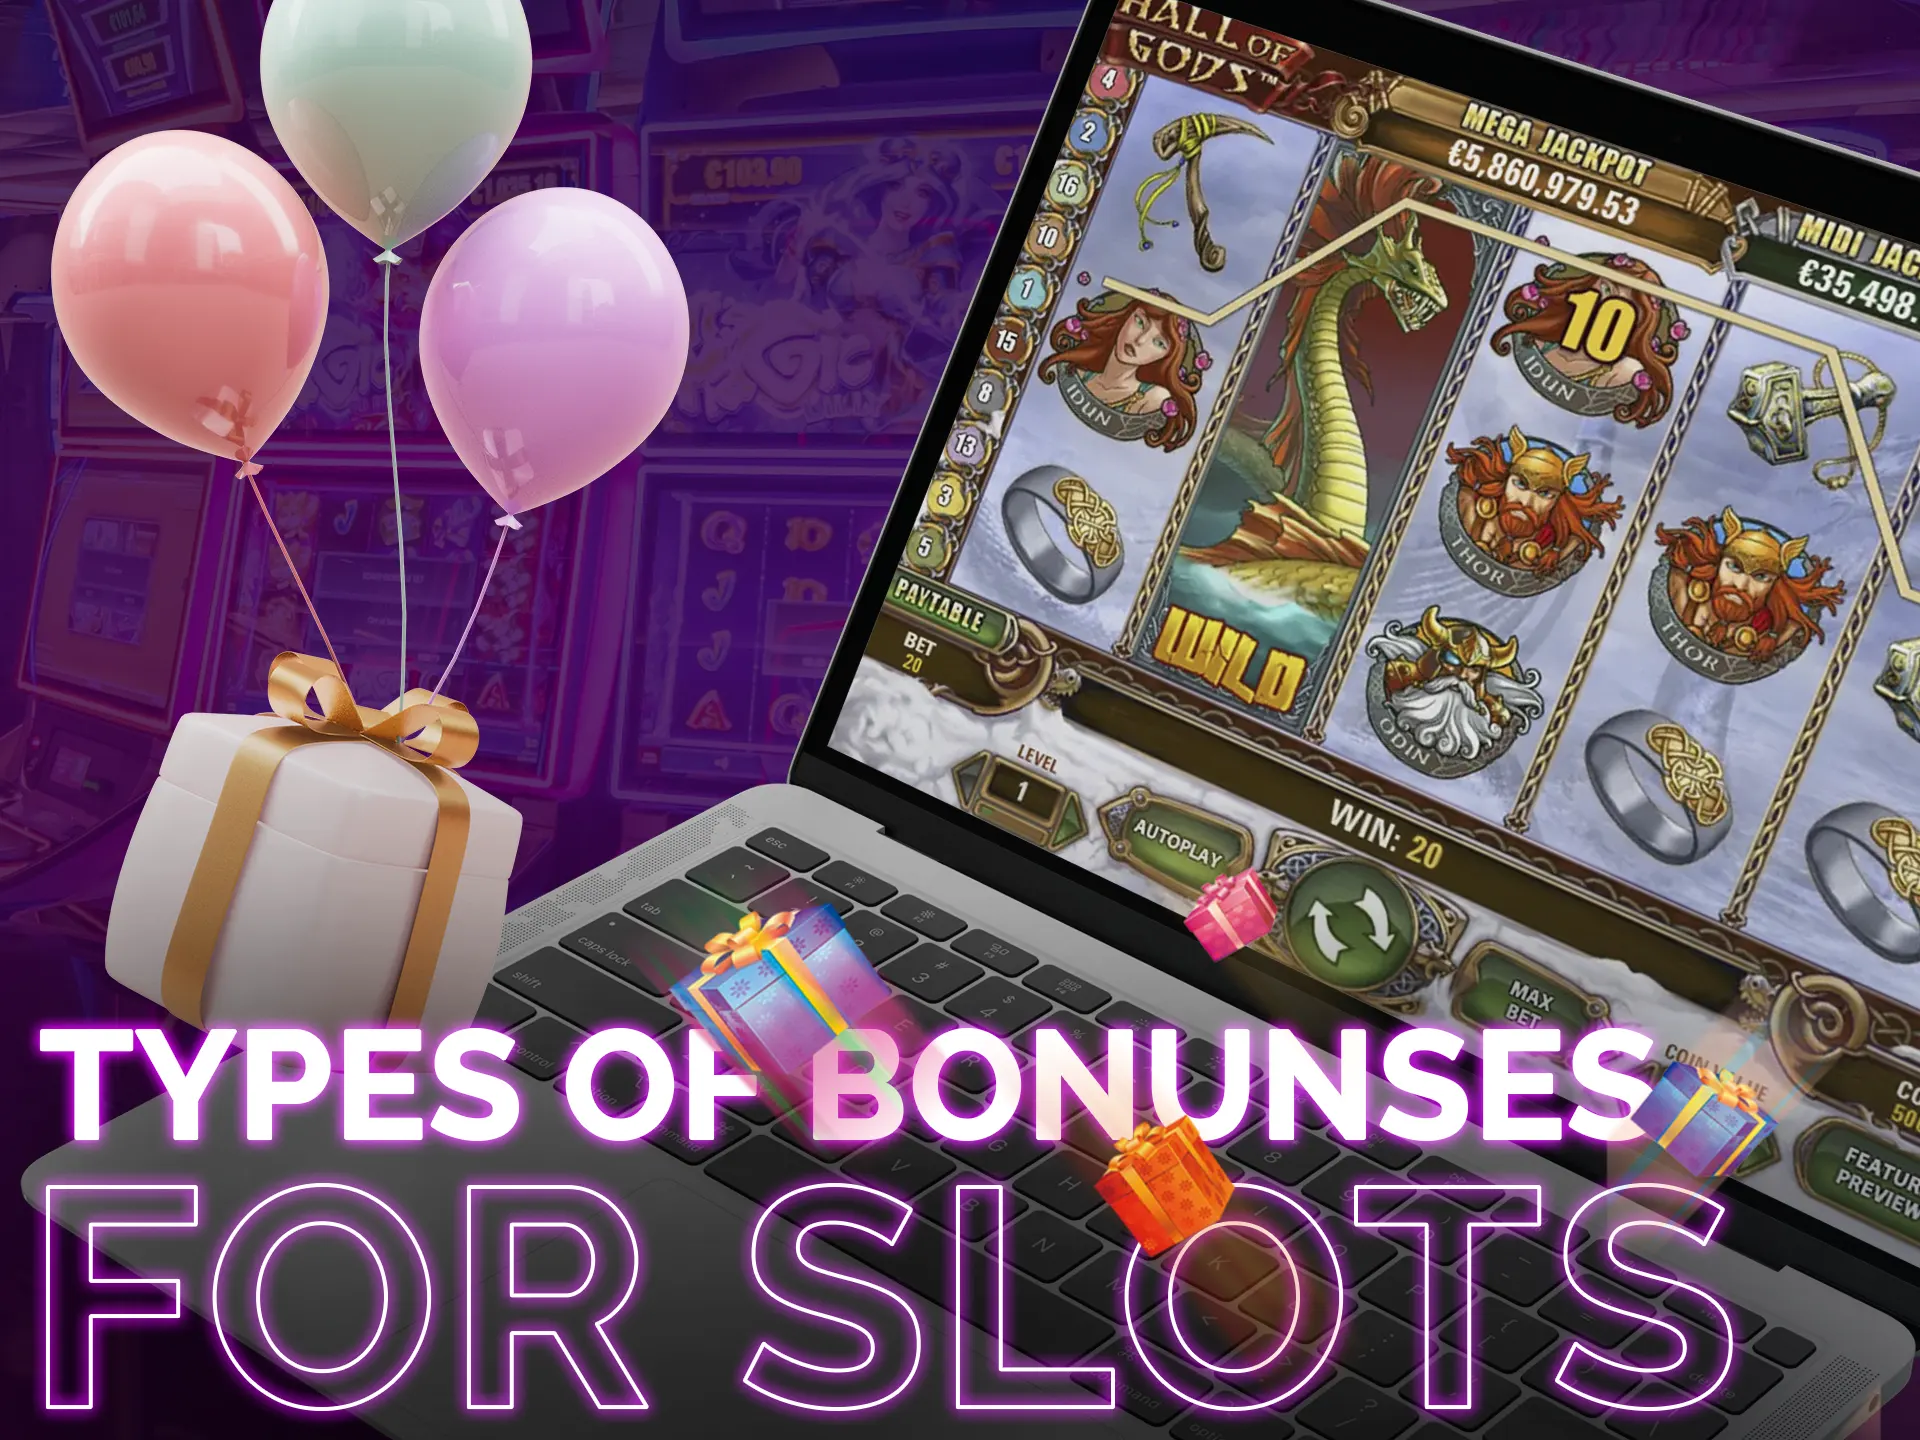 Check out the list of bonuses that will be available to you while playing slots.